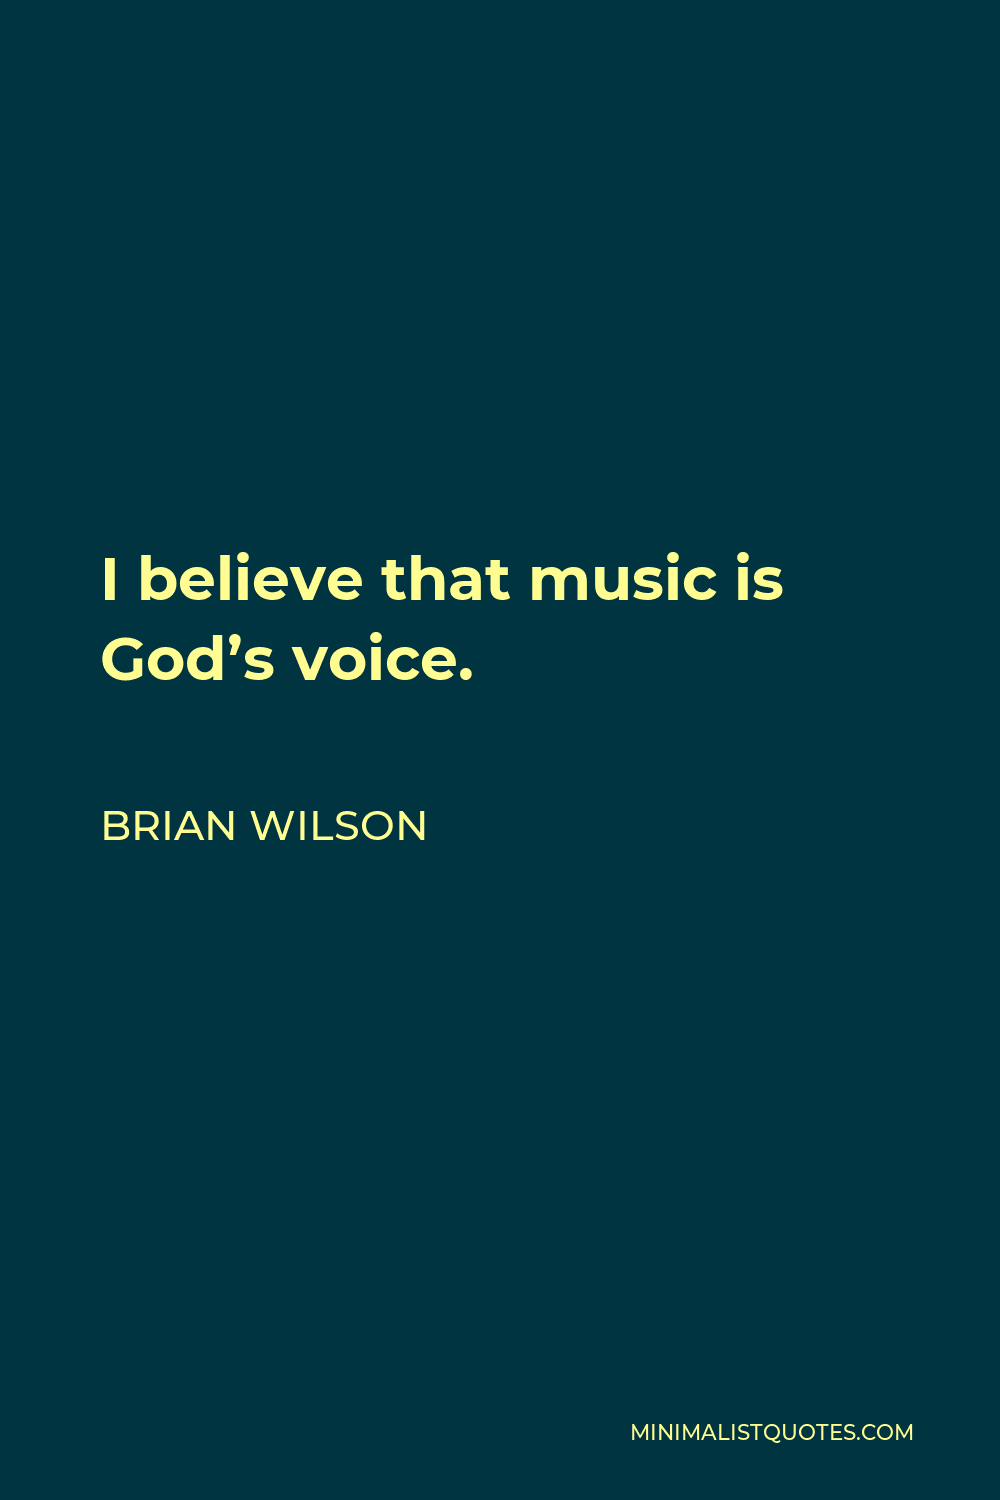 Brian Wilson Quote - I believe that music is God’s voice.